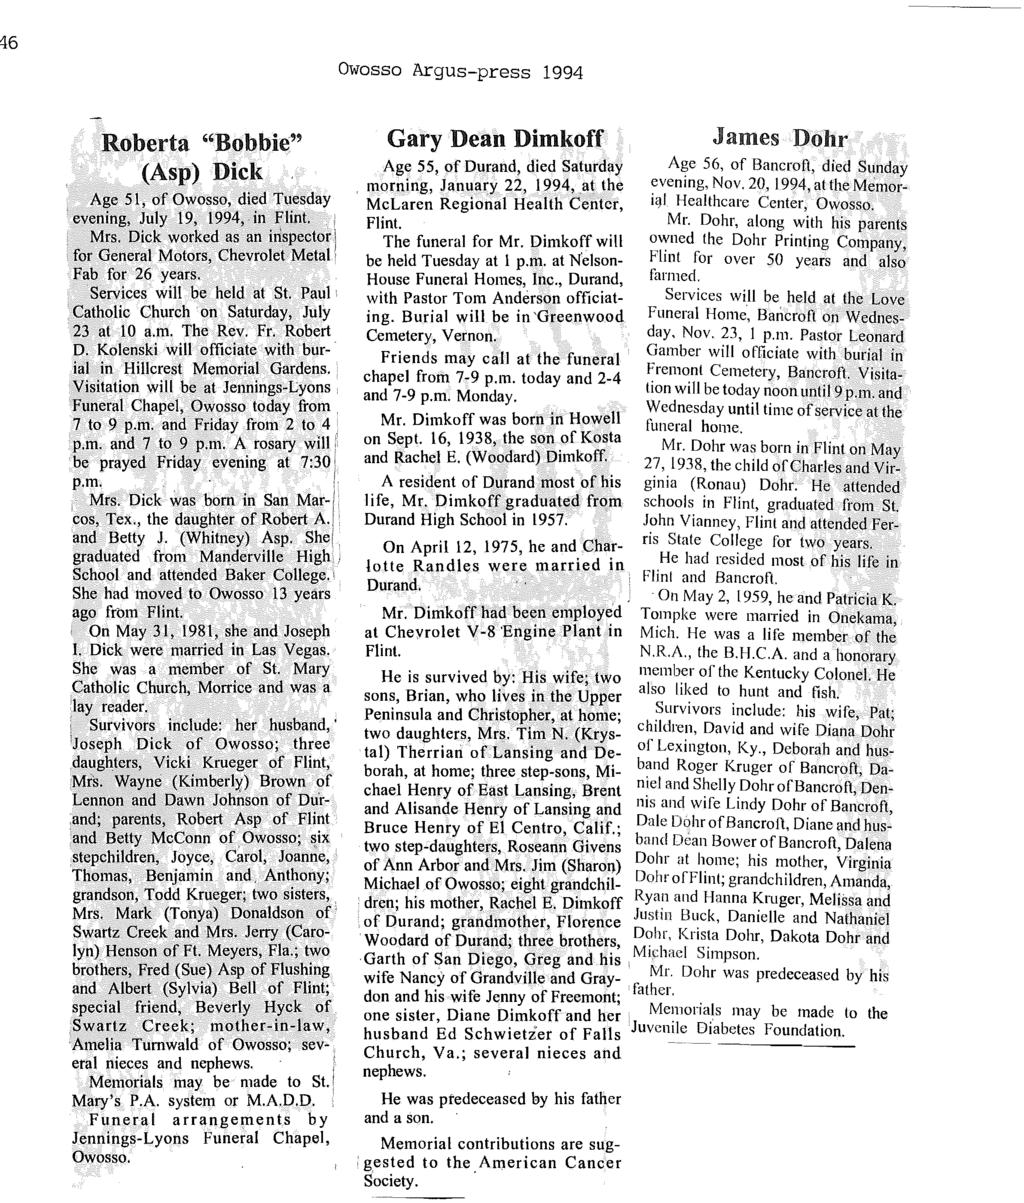 46 Owosso Argus-press 1994 Roberta "Bobbie'~ (Asp) Dick Age 51, of Owosso, died Tuesday evening, July 19, 1994,in Flint. Mrs.